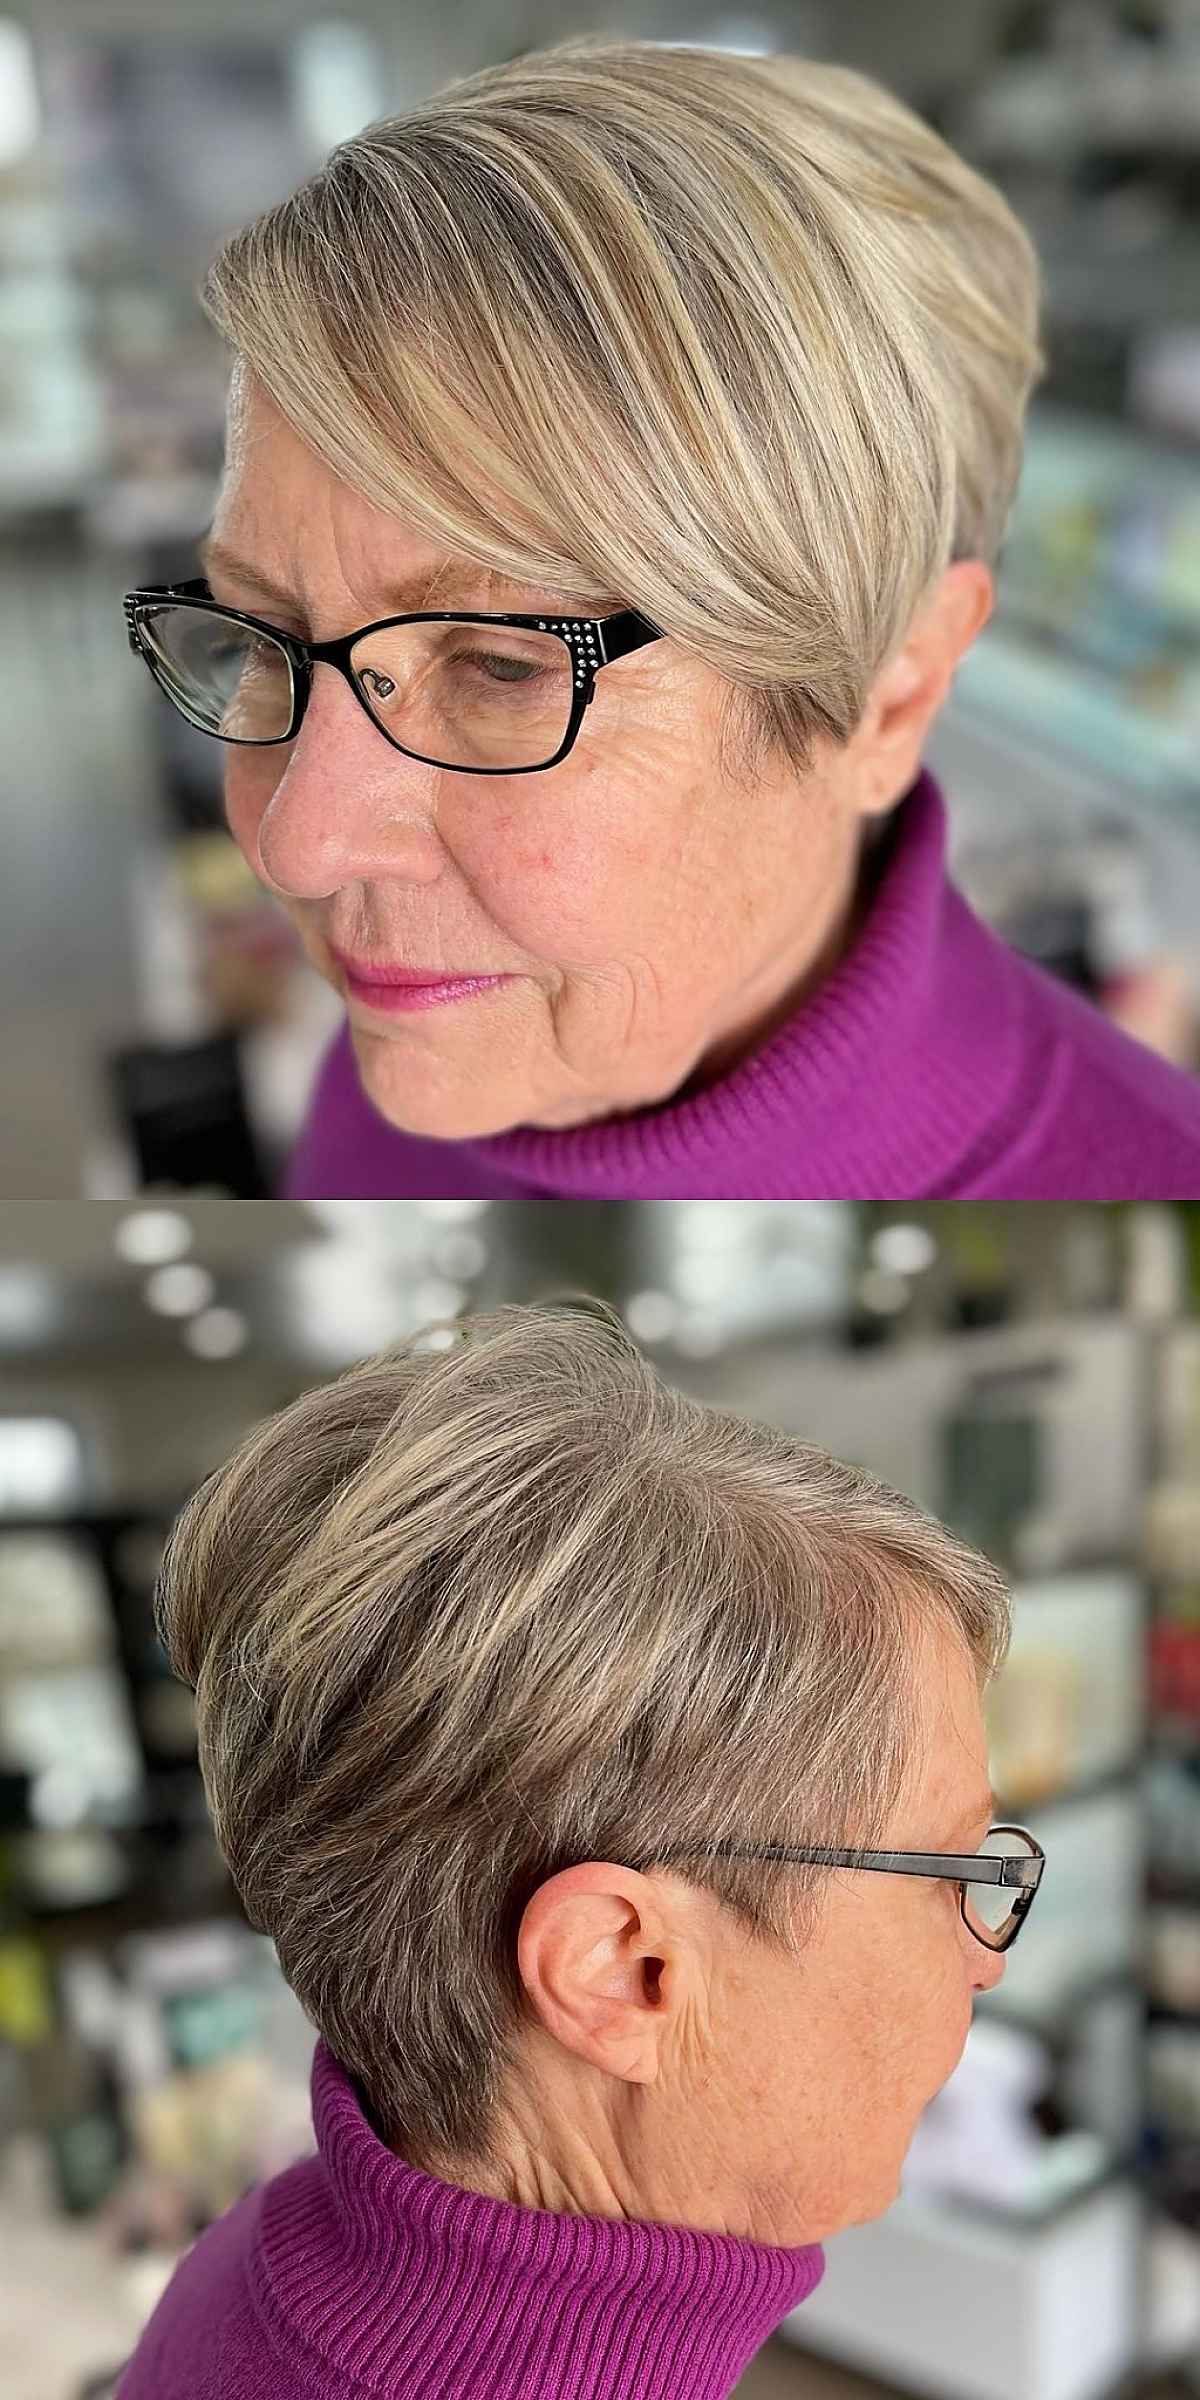 Asymmetrical Pixie for Round Faces for ladies in their 60s